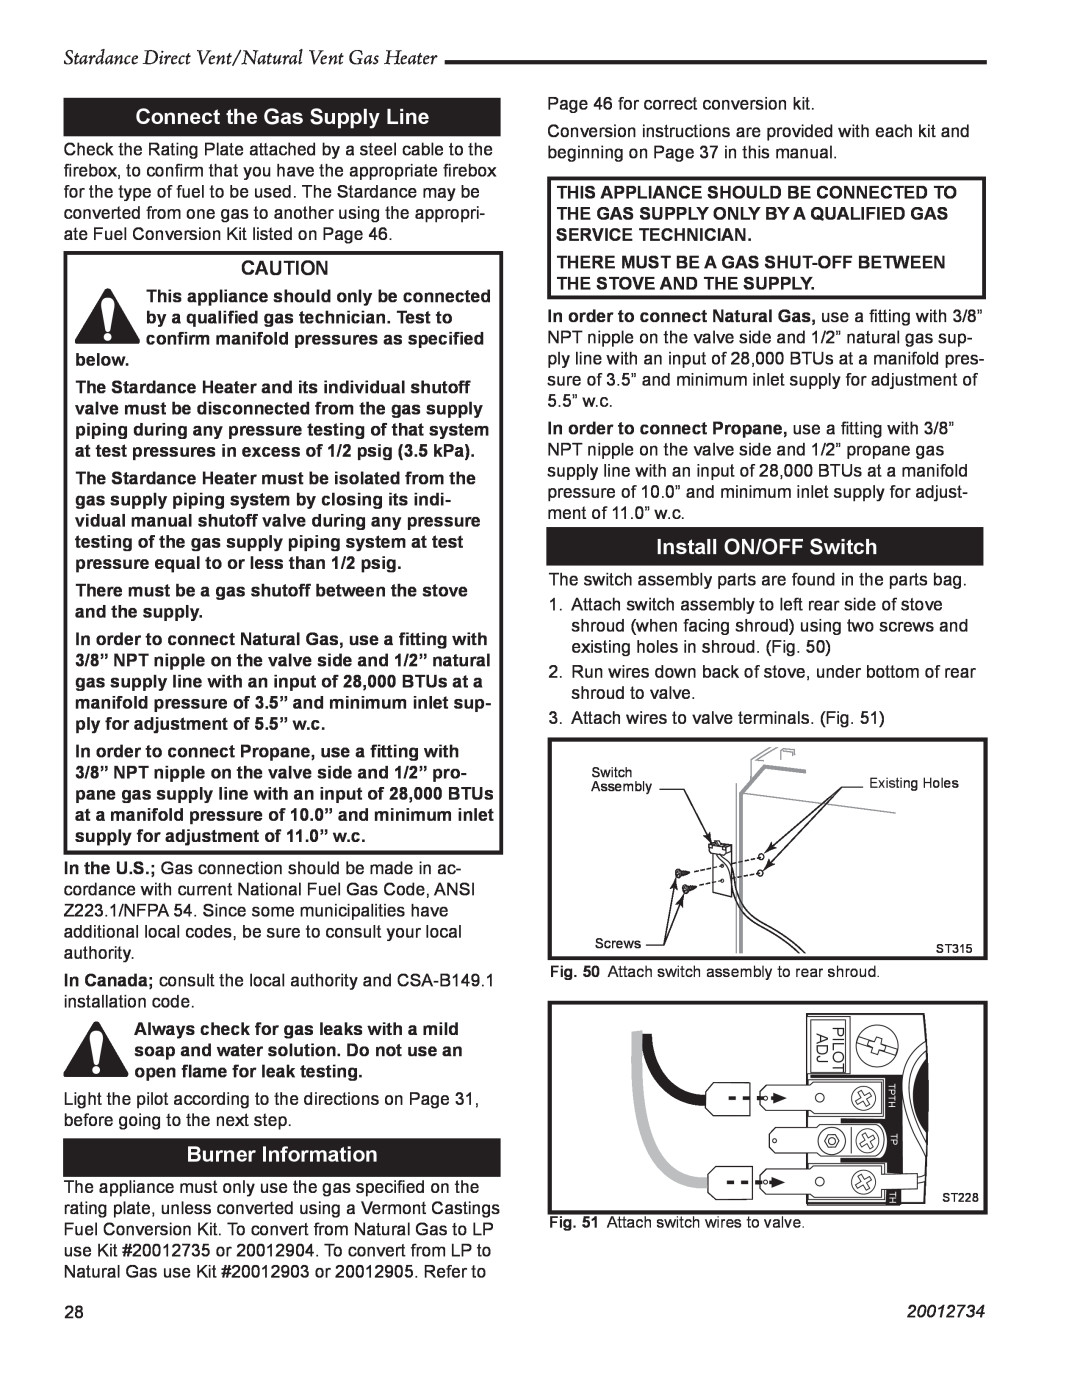 Vermont Casting SDDVTCMB, SDDVTCVG manual Connect the Gas Supply Line, Burner Information, Install ON/OFF Switch, 20012734 